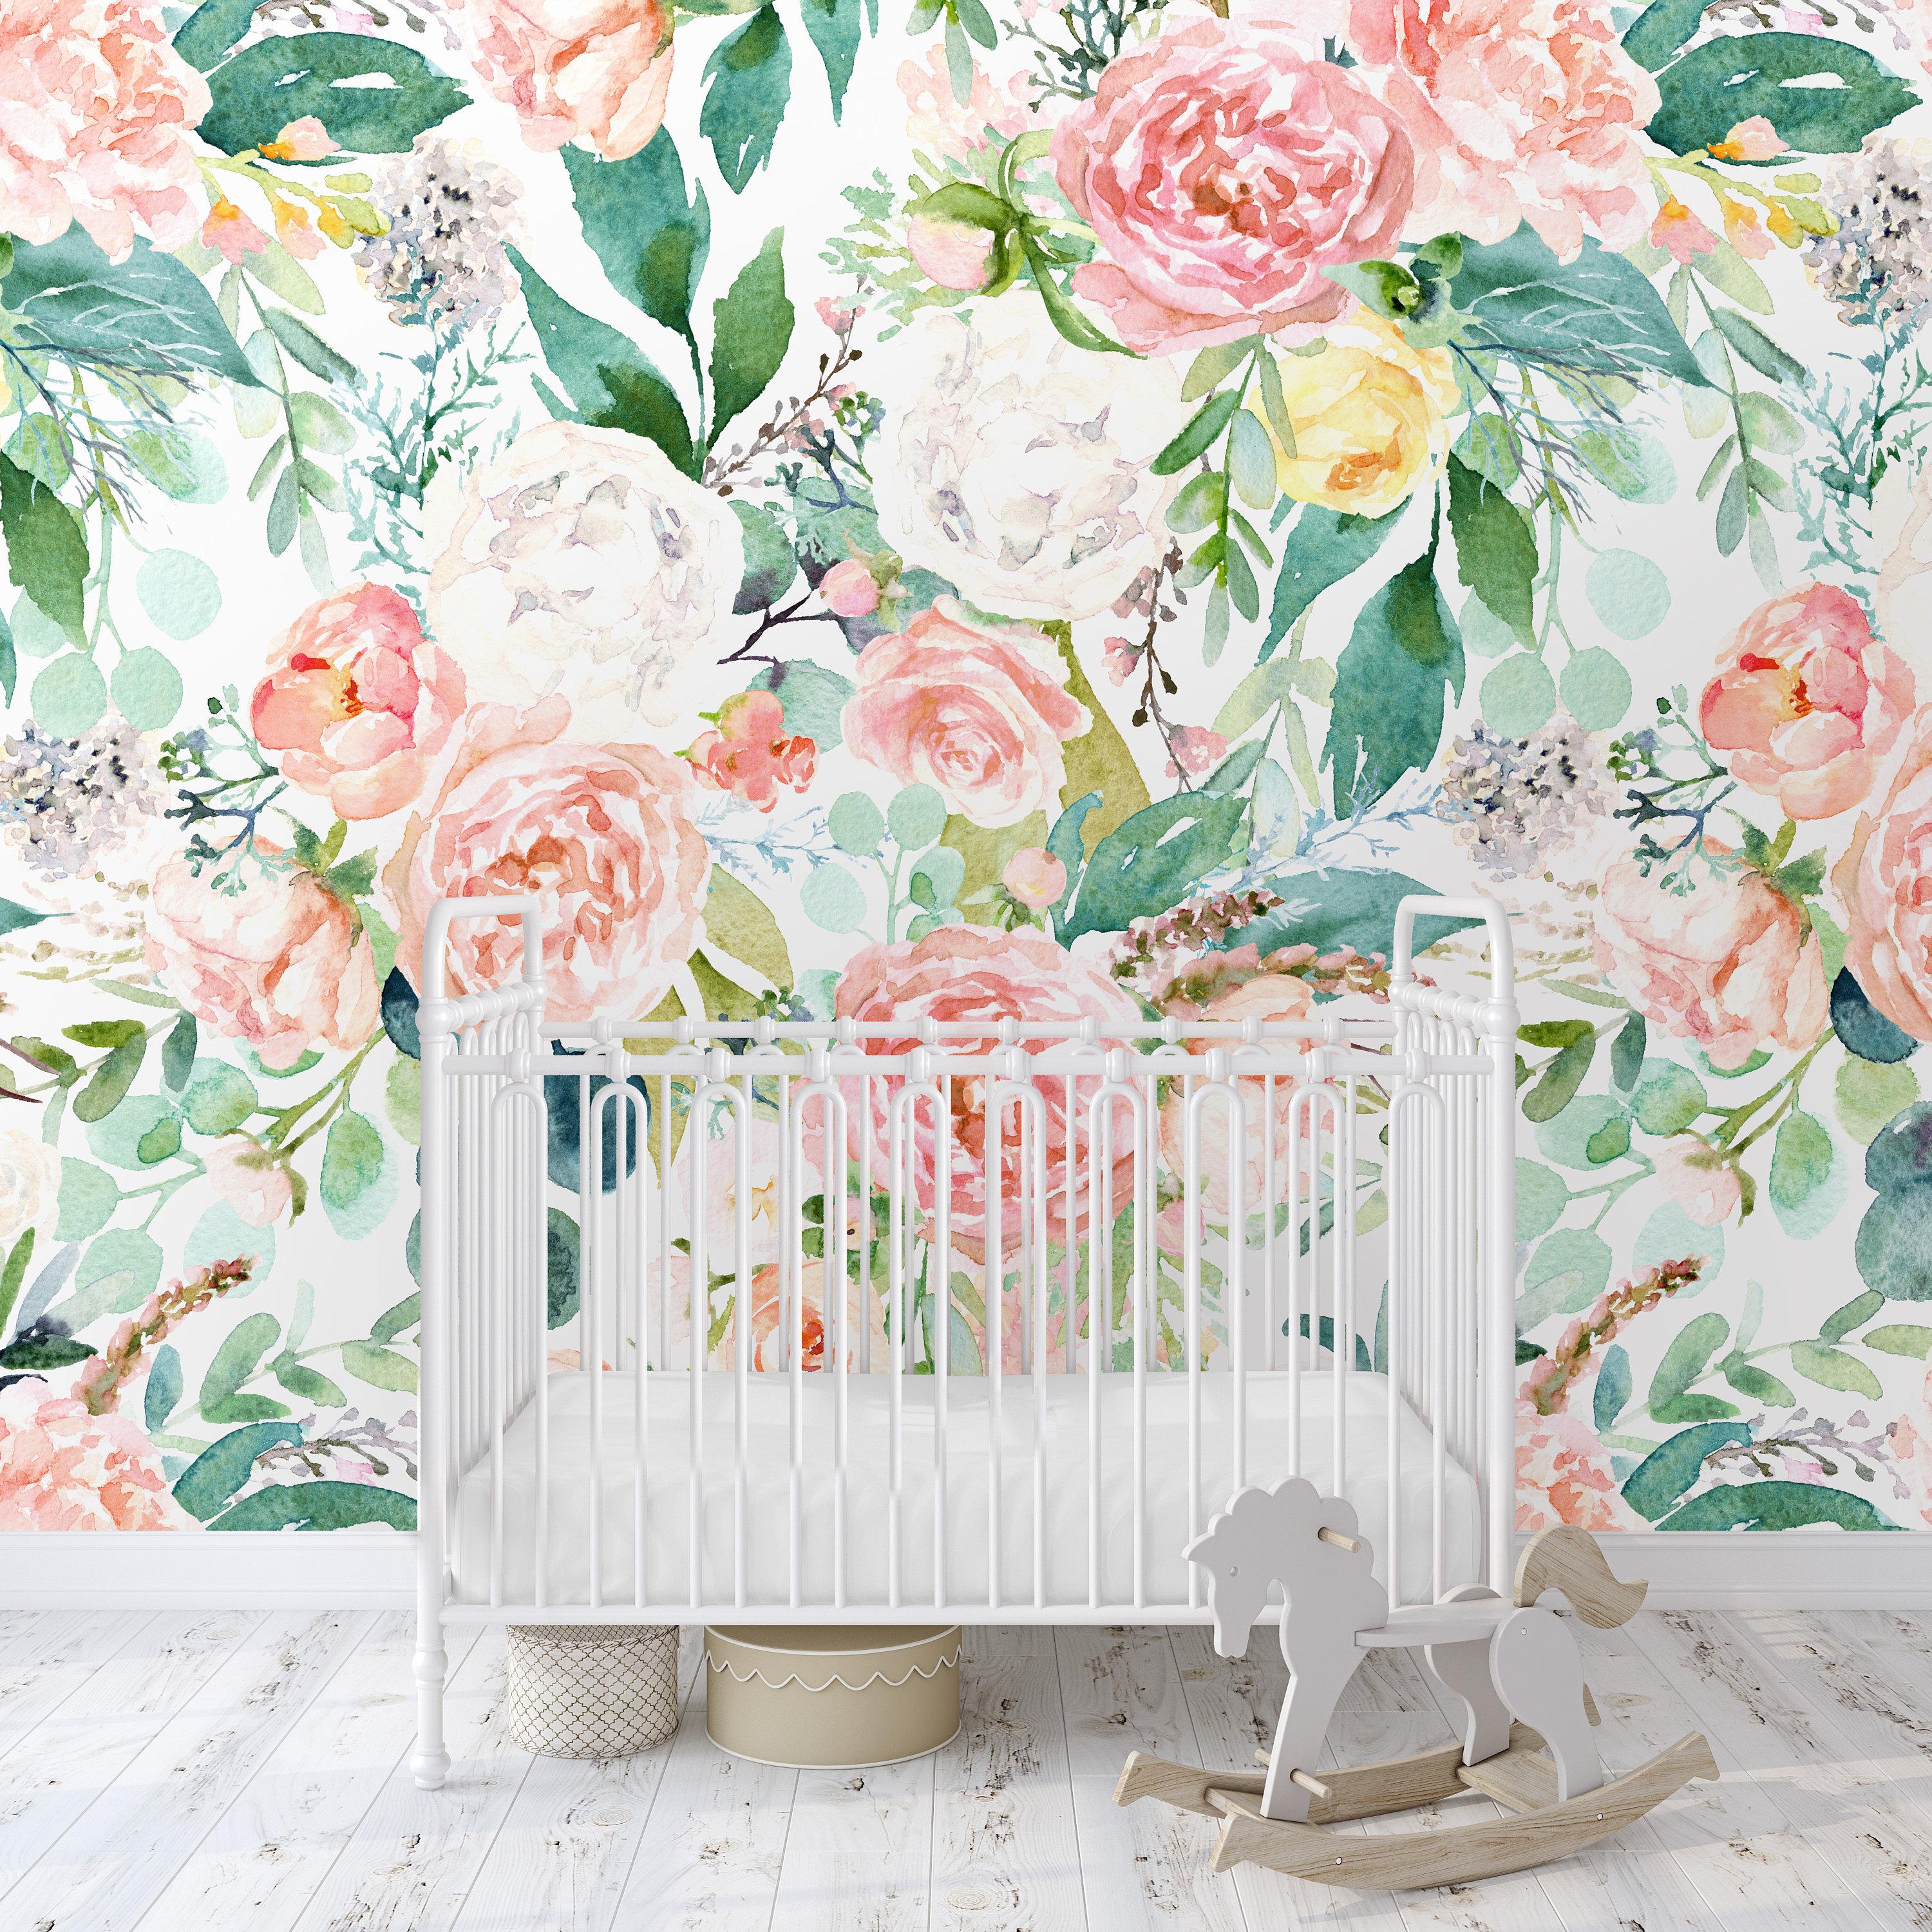 Bright Pastel Floral Wallpaper Peel and Stick Removable hq picture